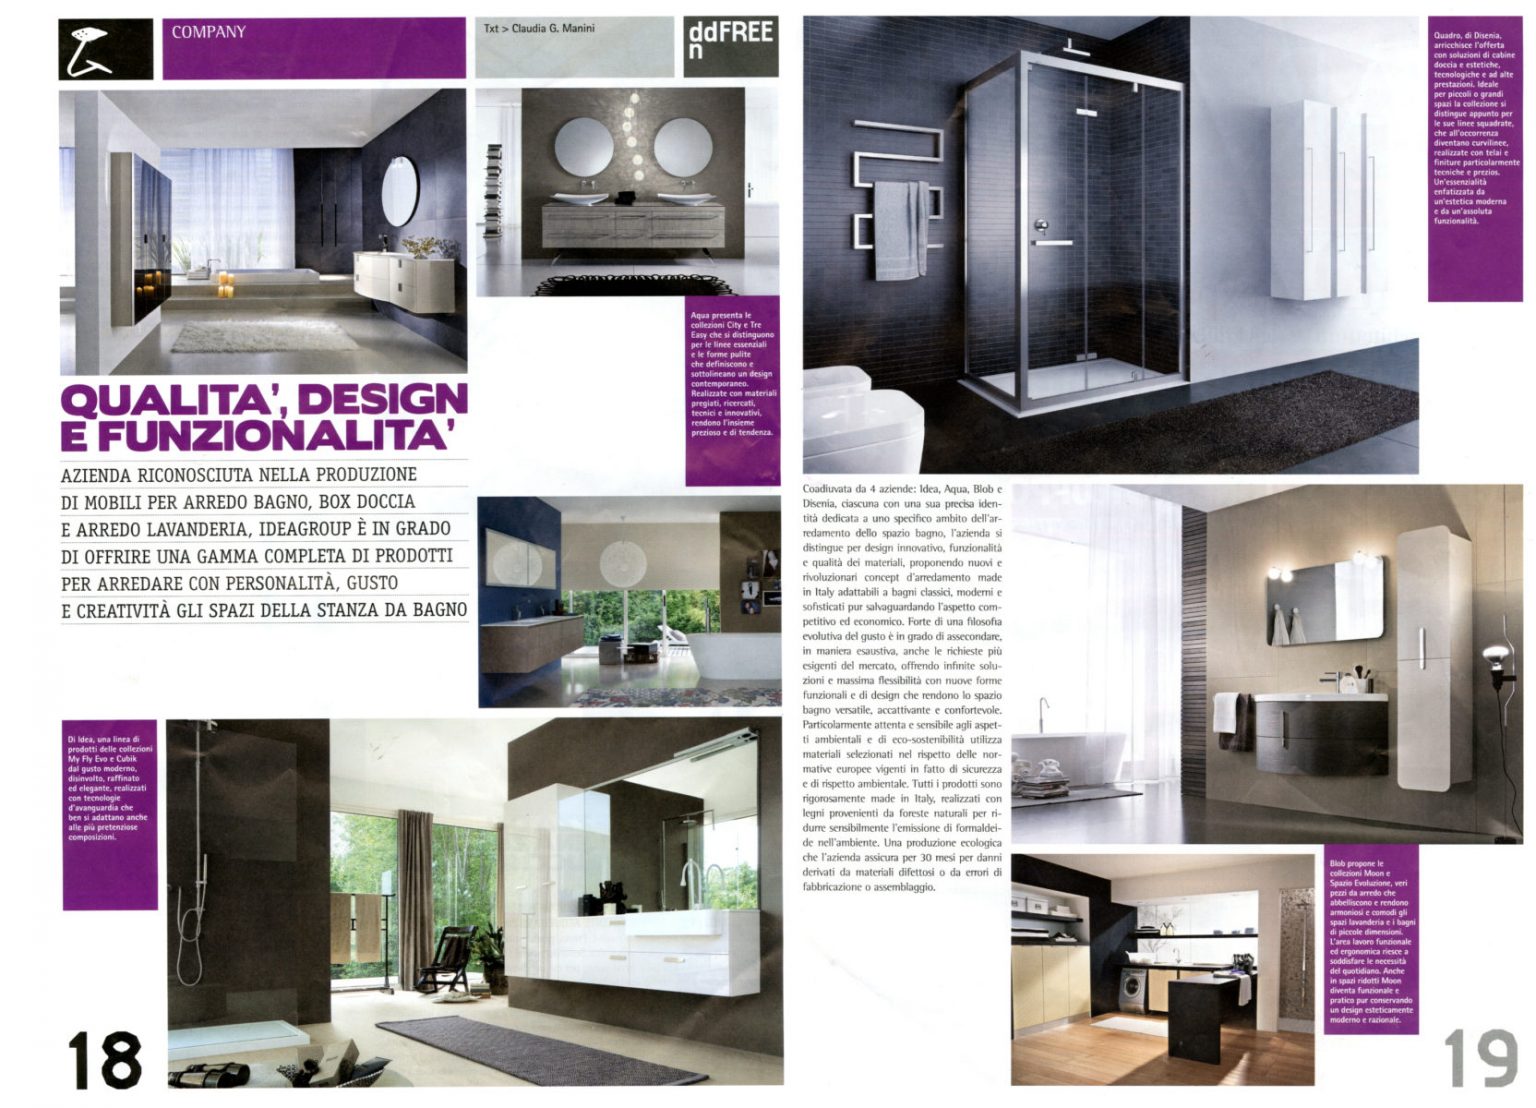 Ideagroup&#8217;s bathroom solutions on DDN Free Speciale Cersaie 2011